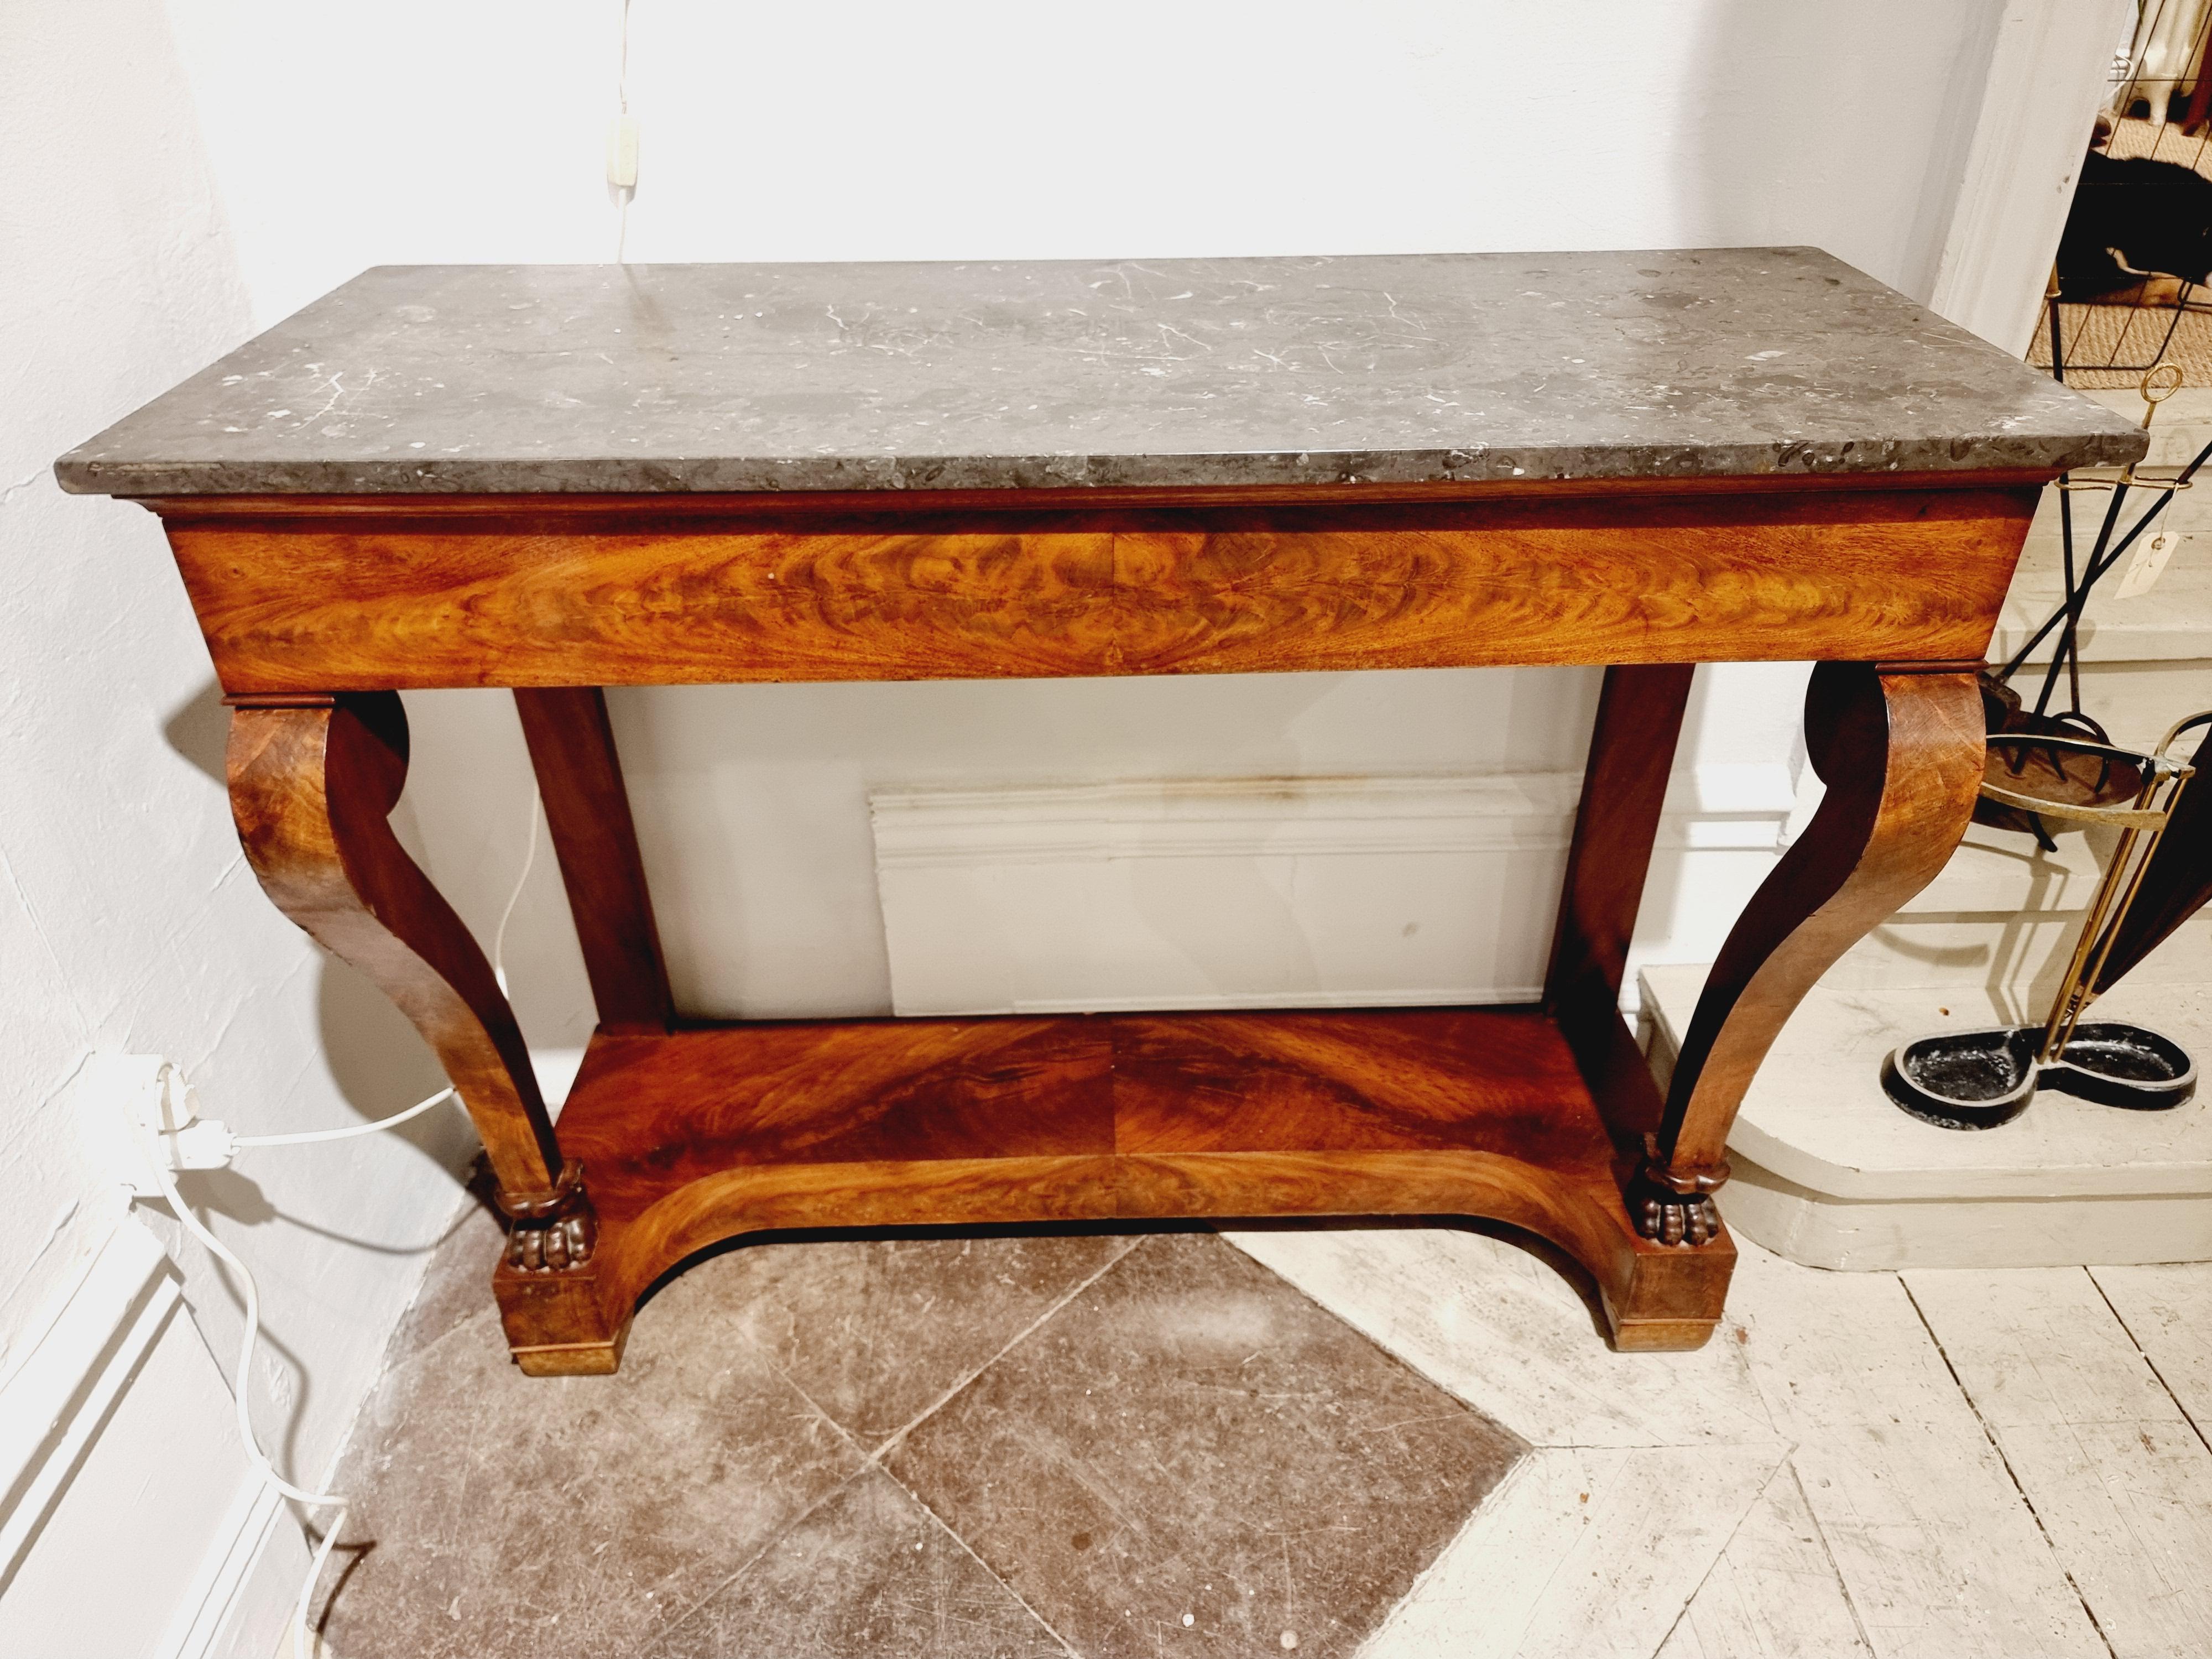 French empire console table with Saint Anne des Pyrenees Marble, a grey marble quarried in France. Wood veneer, beautiful curves and legs with decorative lion paws. An antique timeless beauty that works with most interior styles. 

In beautiful